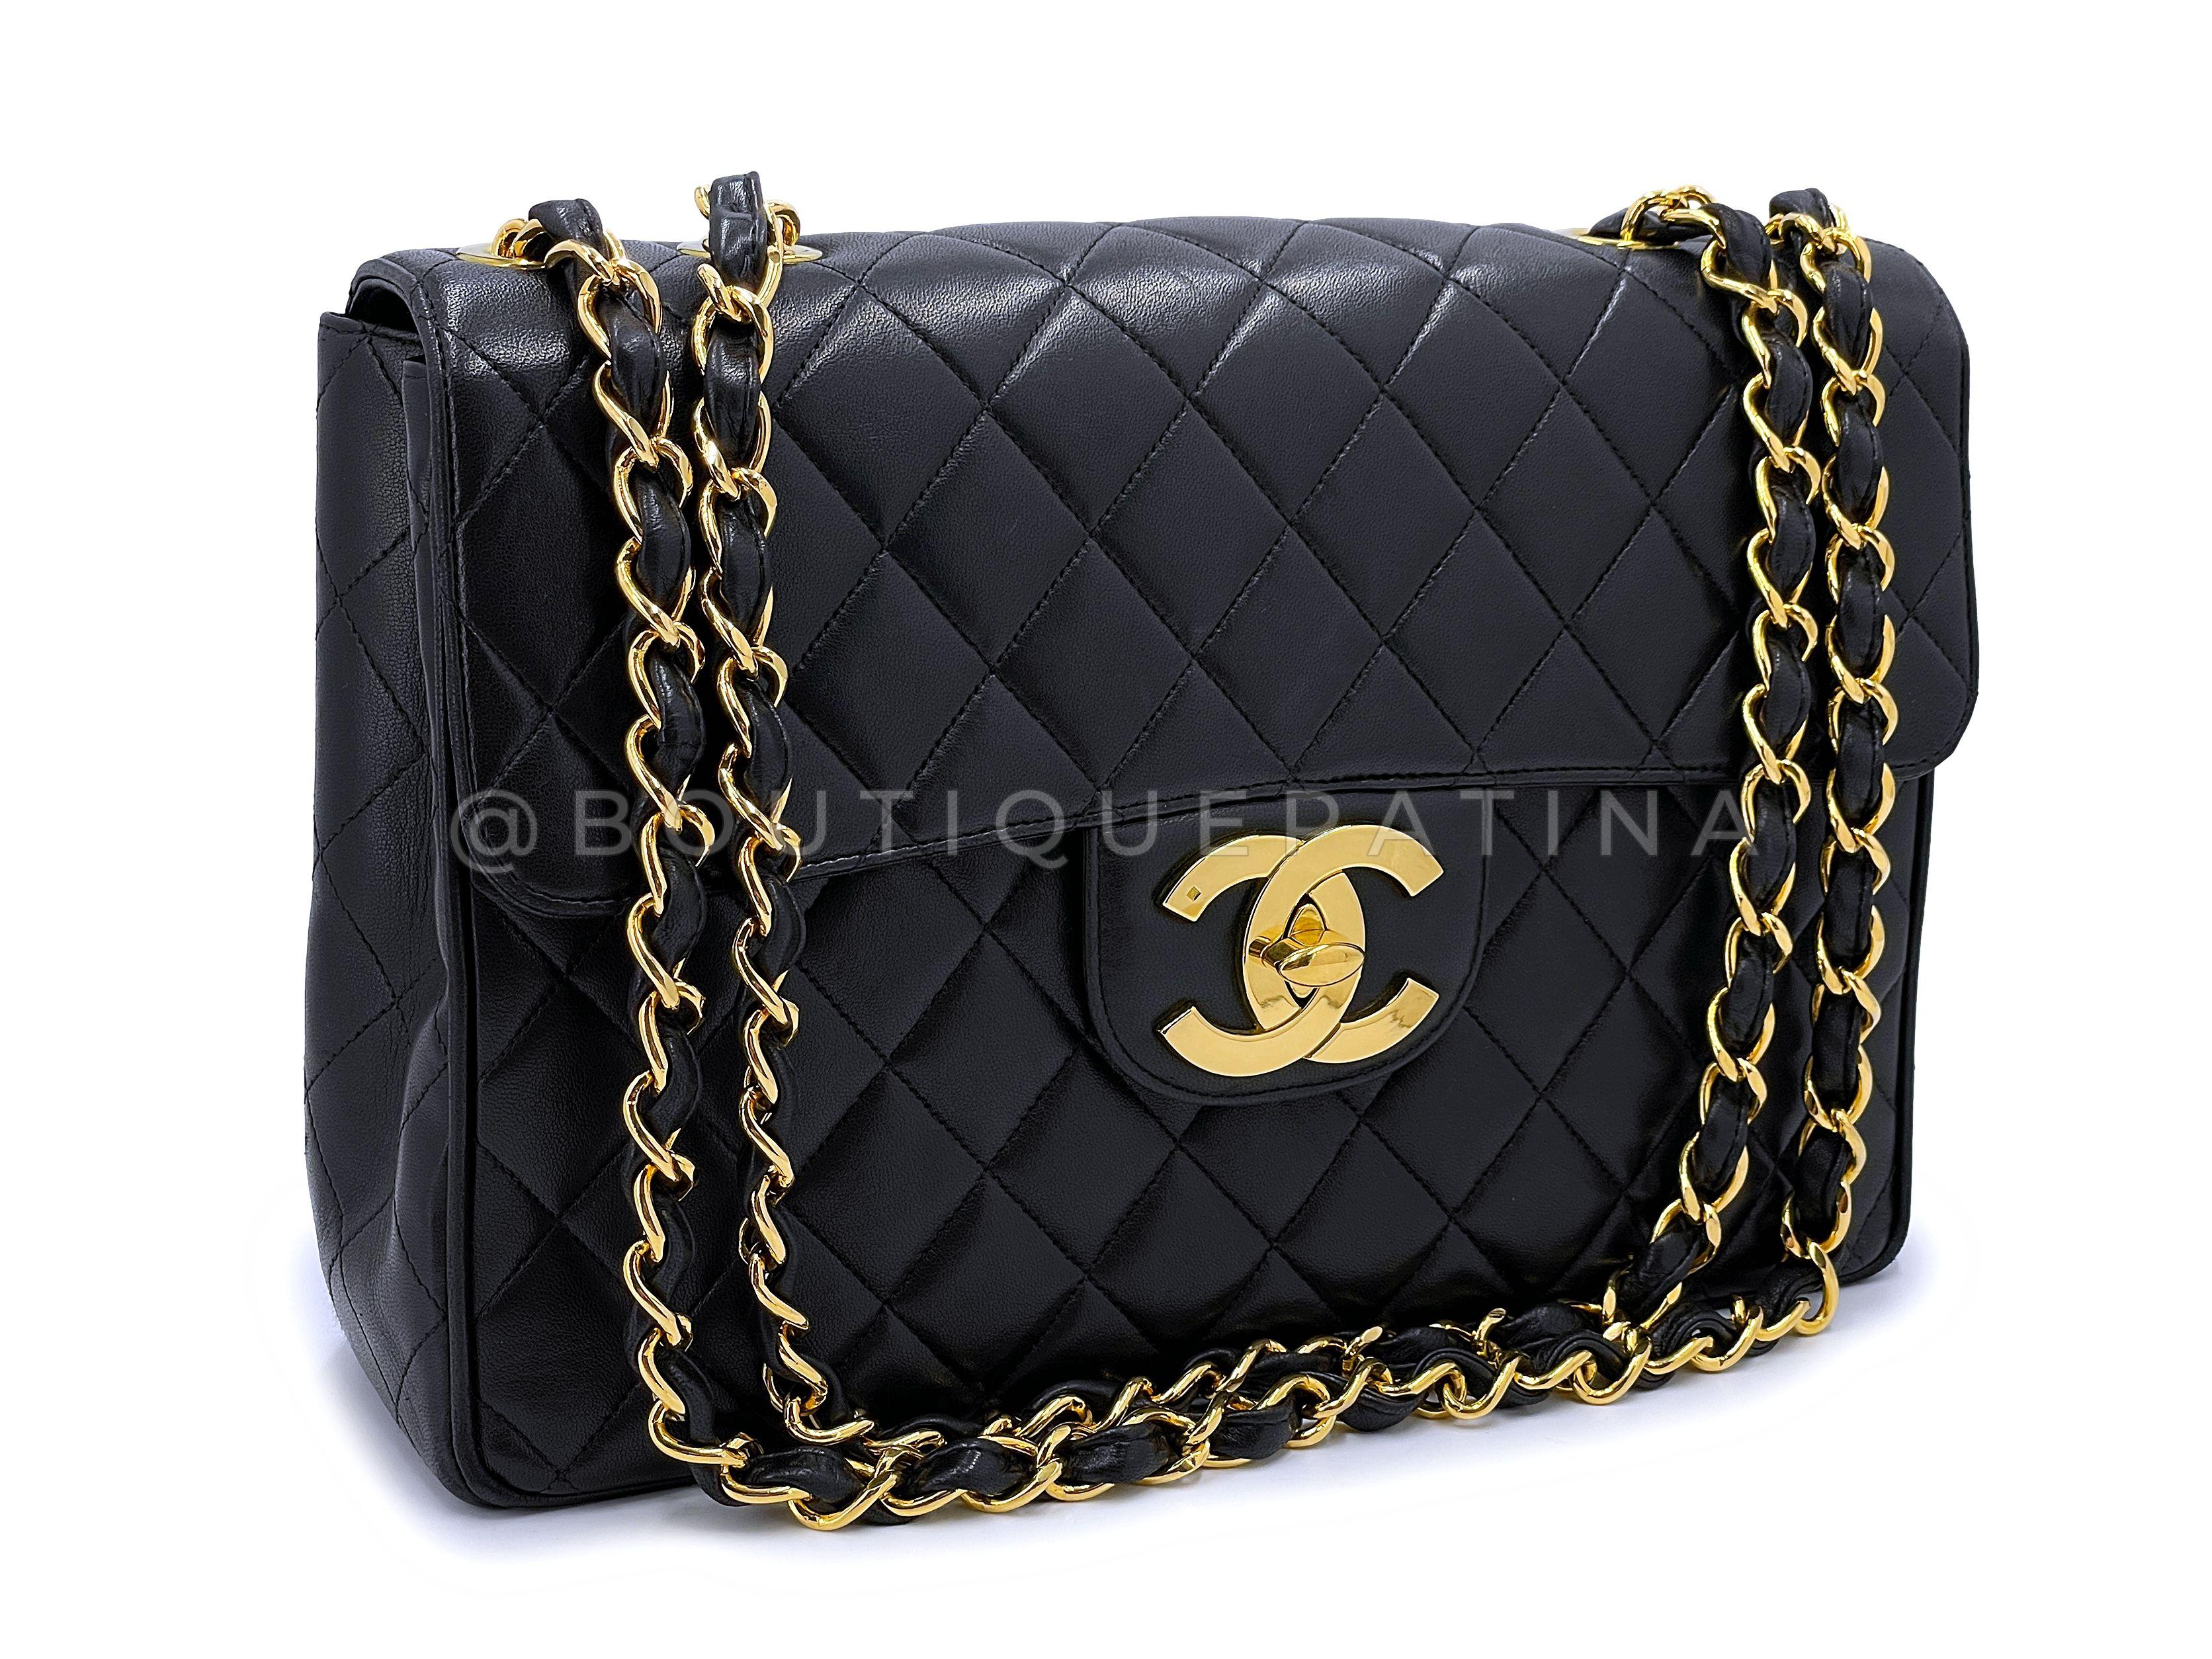 Store item: 67053
Vintage classic Chanel bags are known for their petal-soft lambskin, 24k gold plated hardware and sturdy craftsmanship.
Increasingly harder and harder to find, especially in excellent condition. Boldly Chanel with the oversized